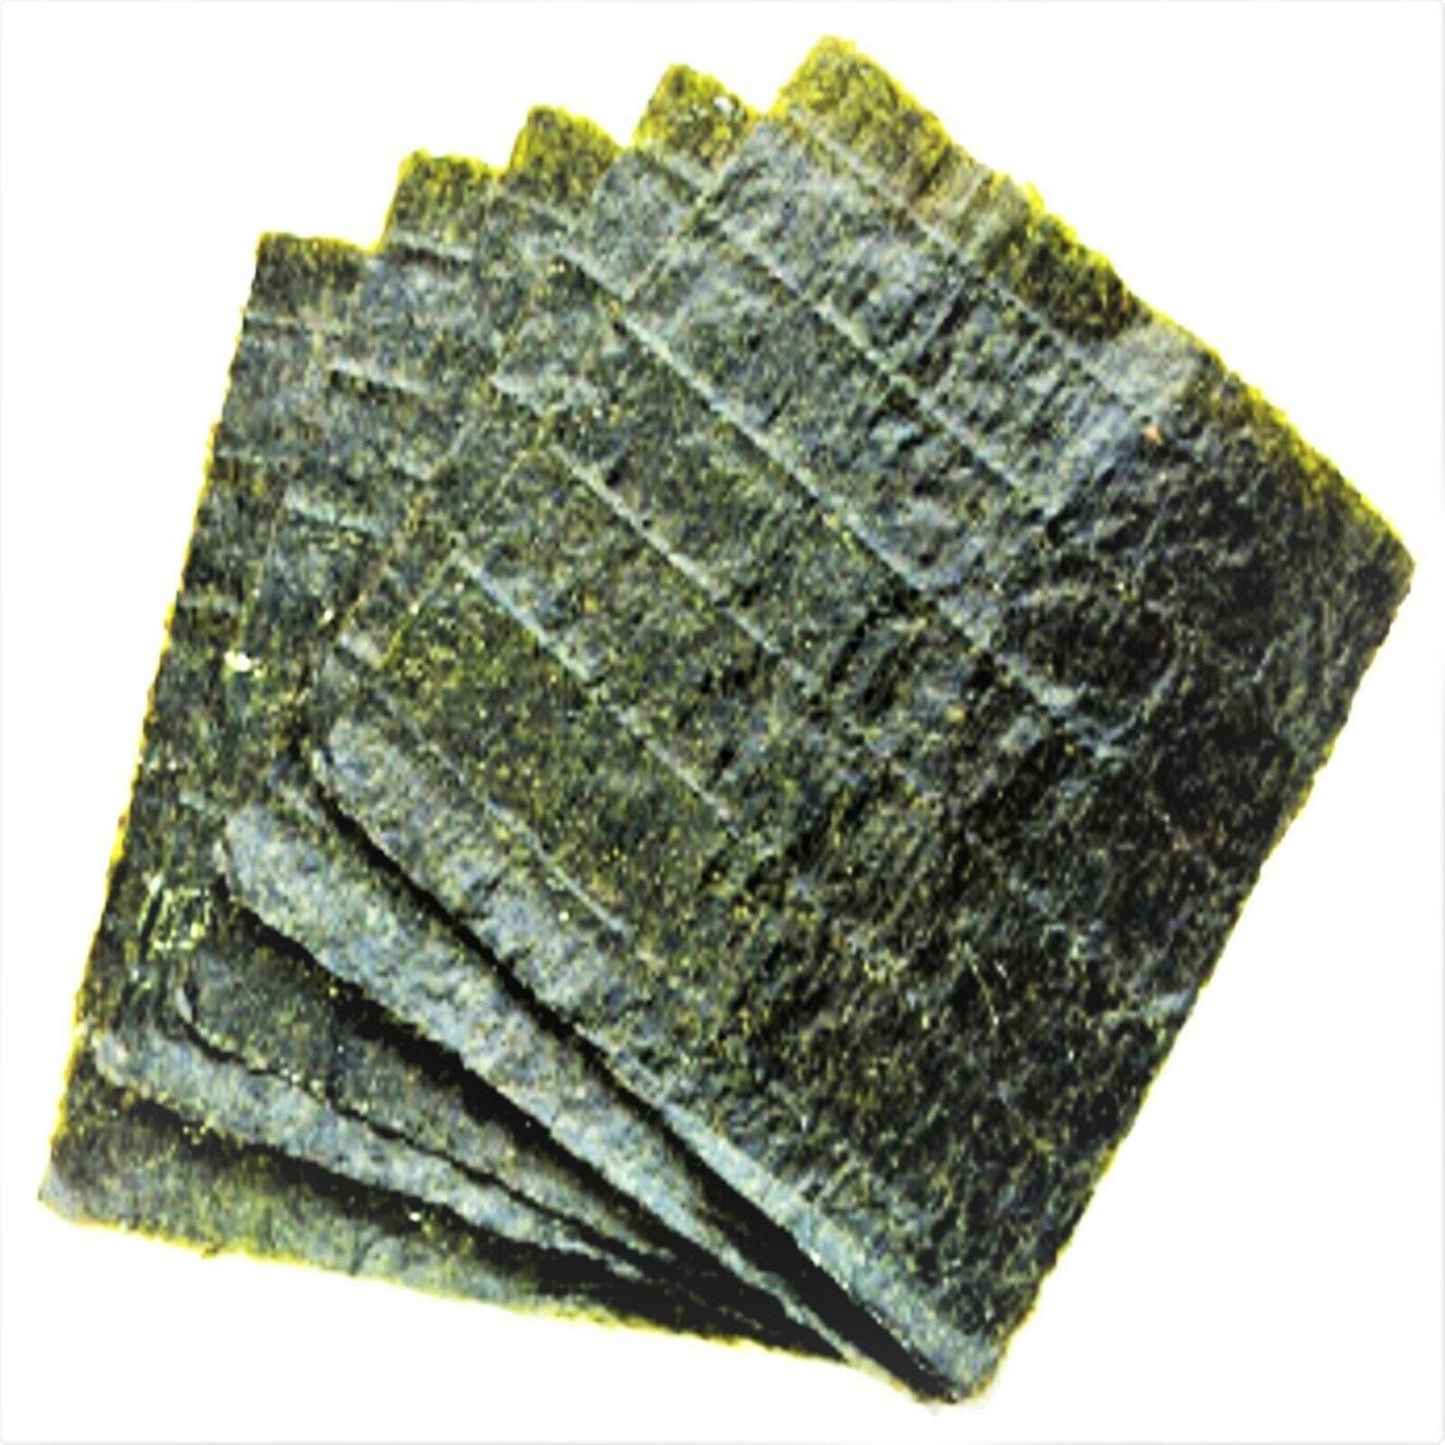 GREEN Seaweed Sheets (4" x 7.5") Perfect for Marines, Plecos, Herbivores